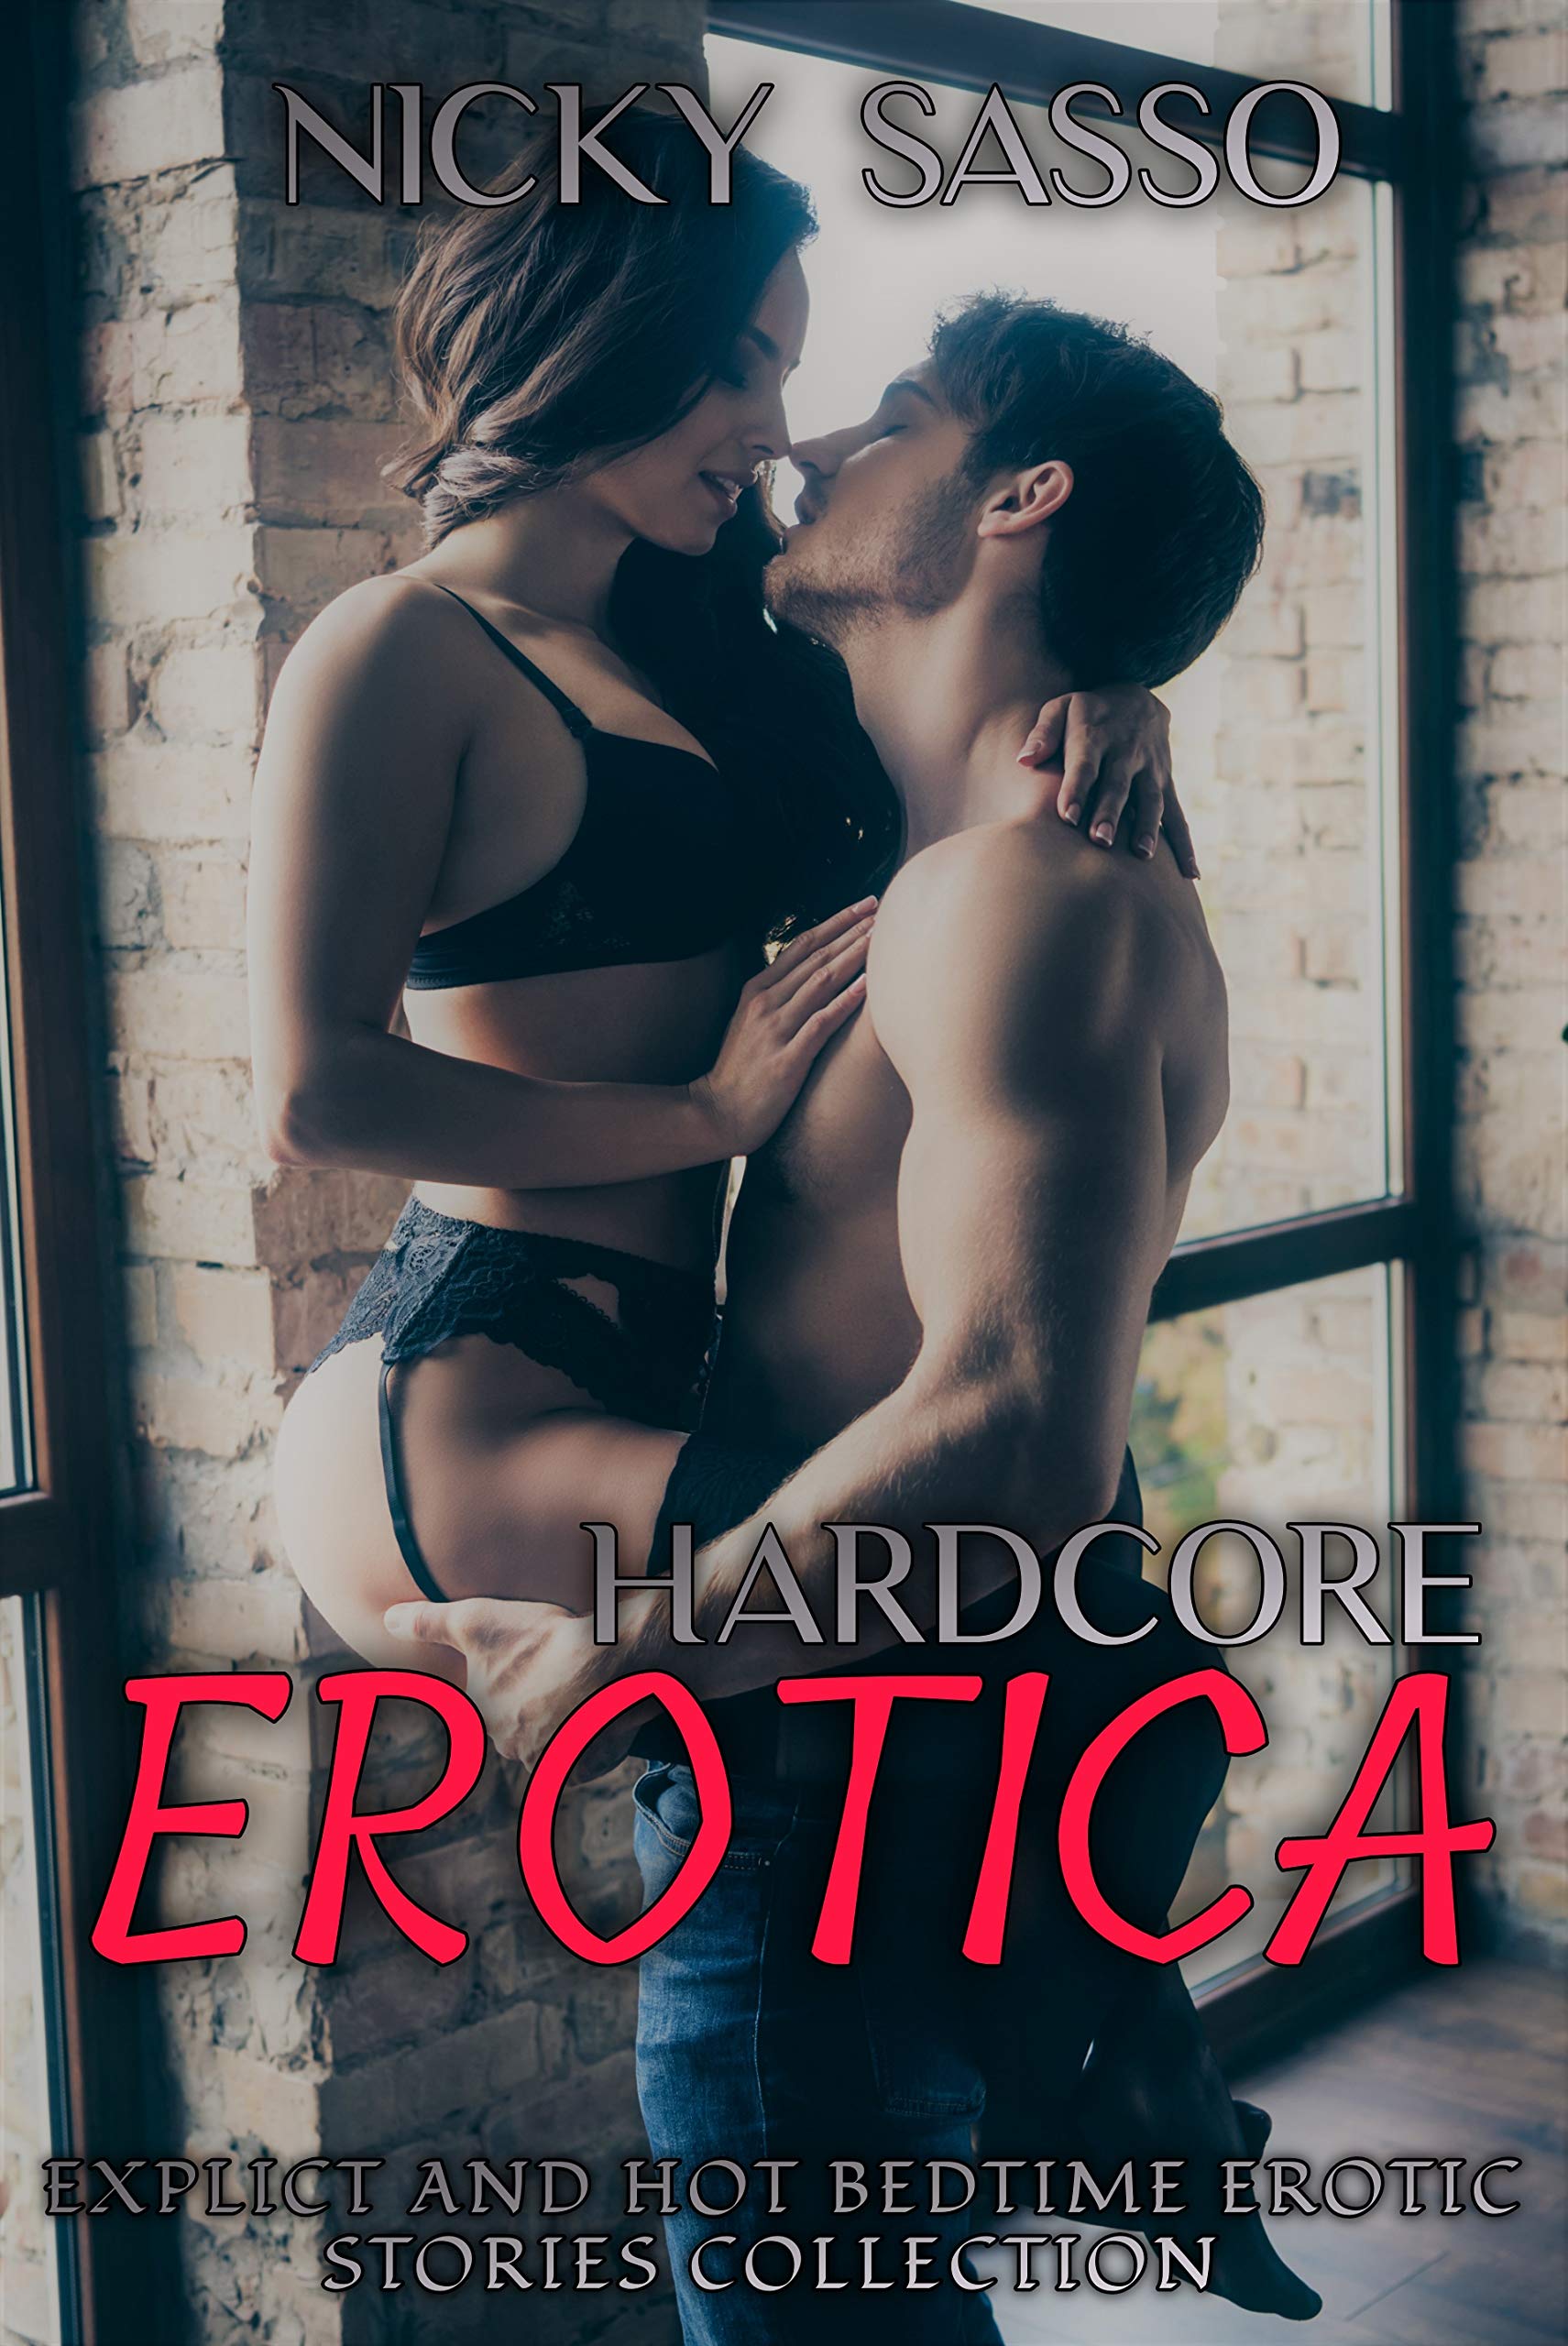 andrew belsky recommends hard core sex stories pic